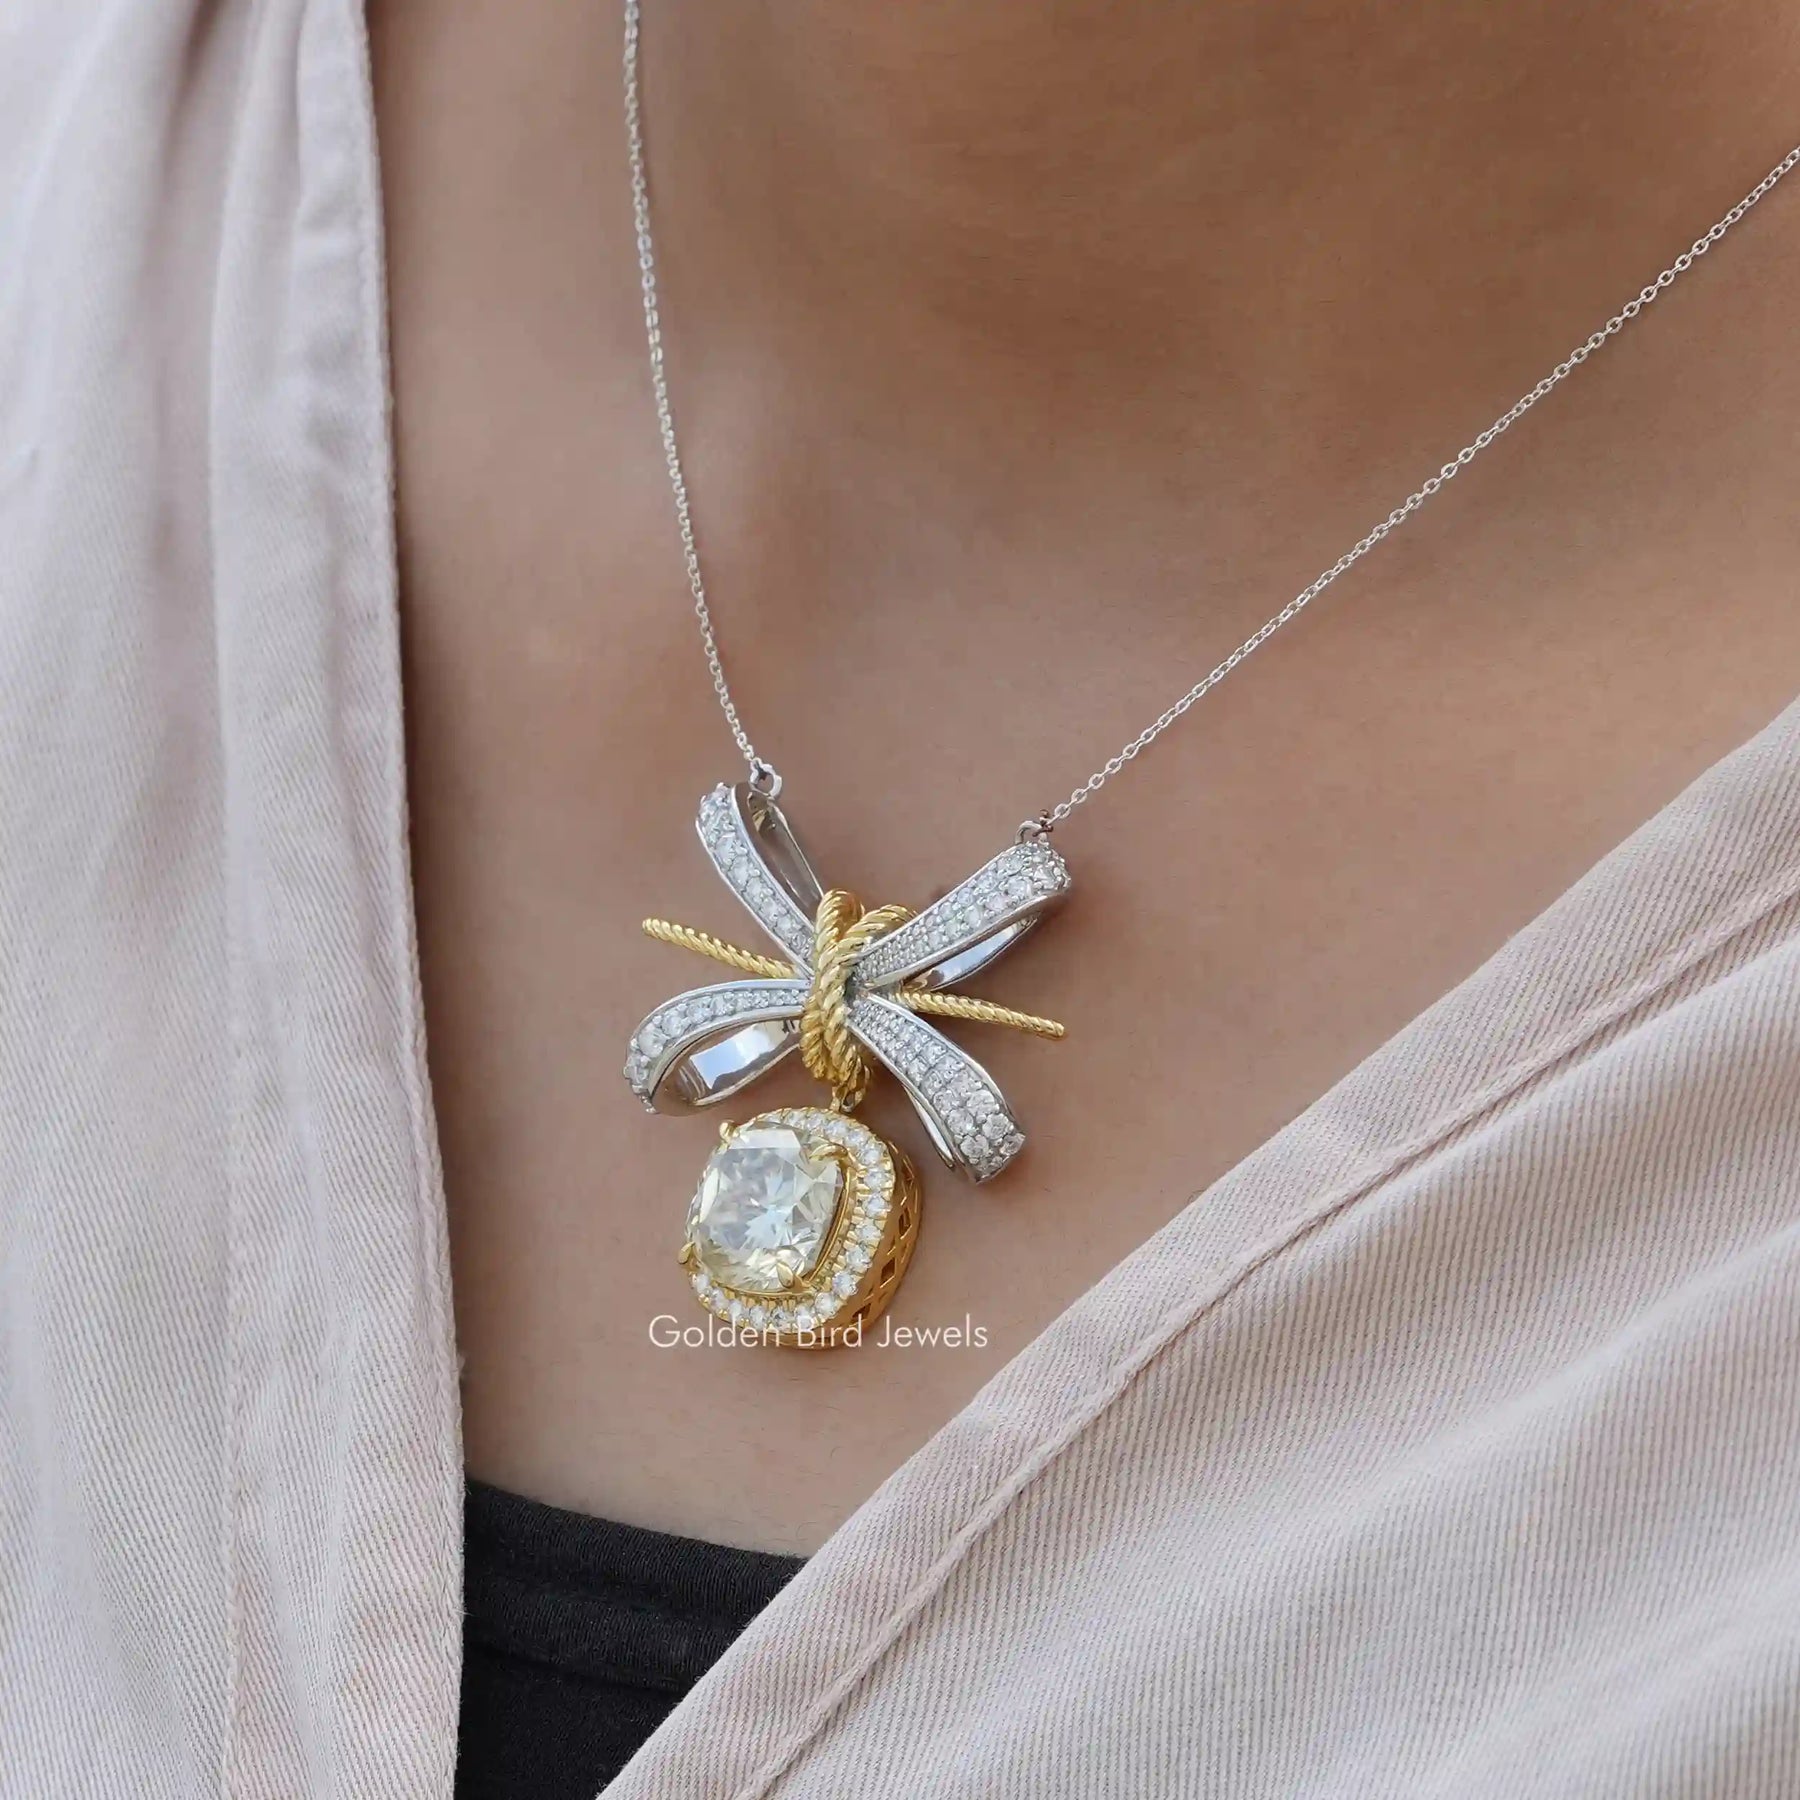 [In neck front view of yellow and white gold cushion halo pendant]-[Golden Bird Jewels]